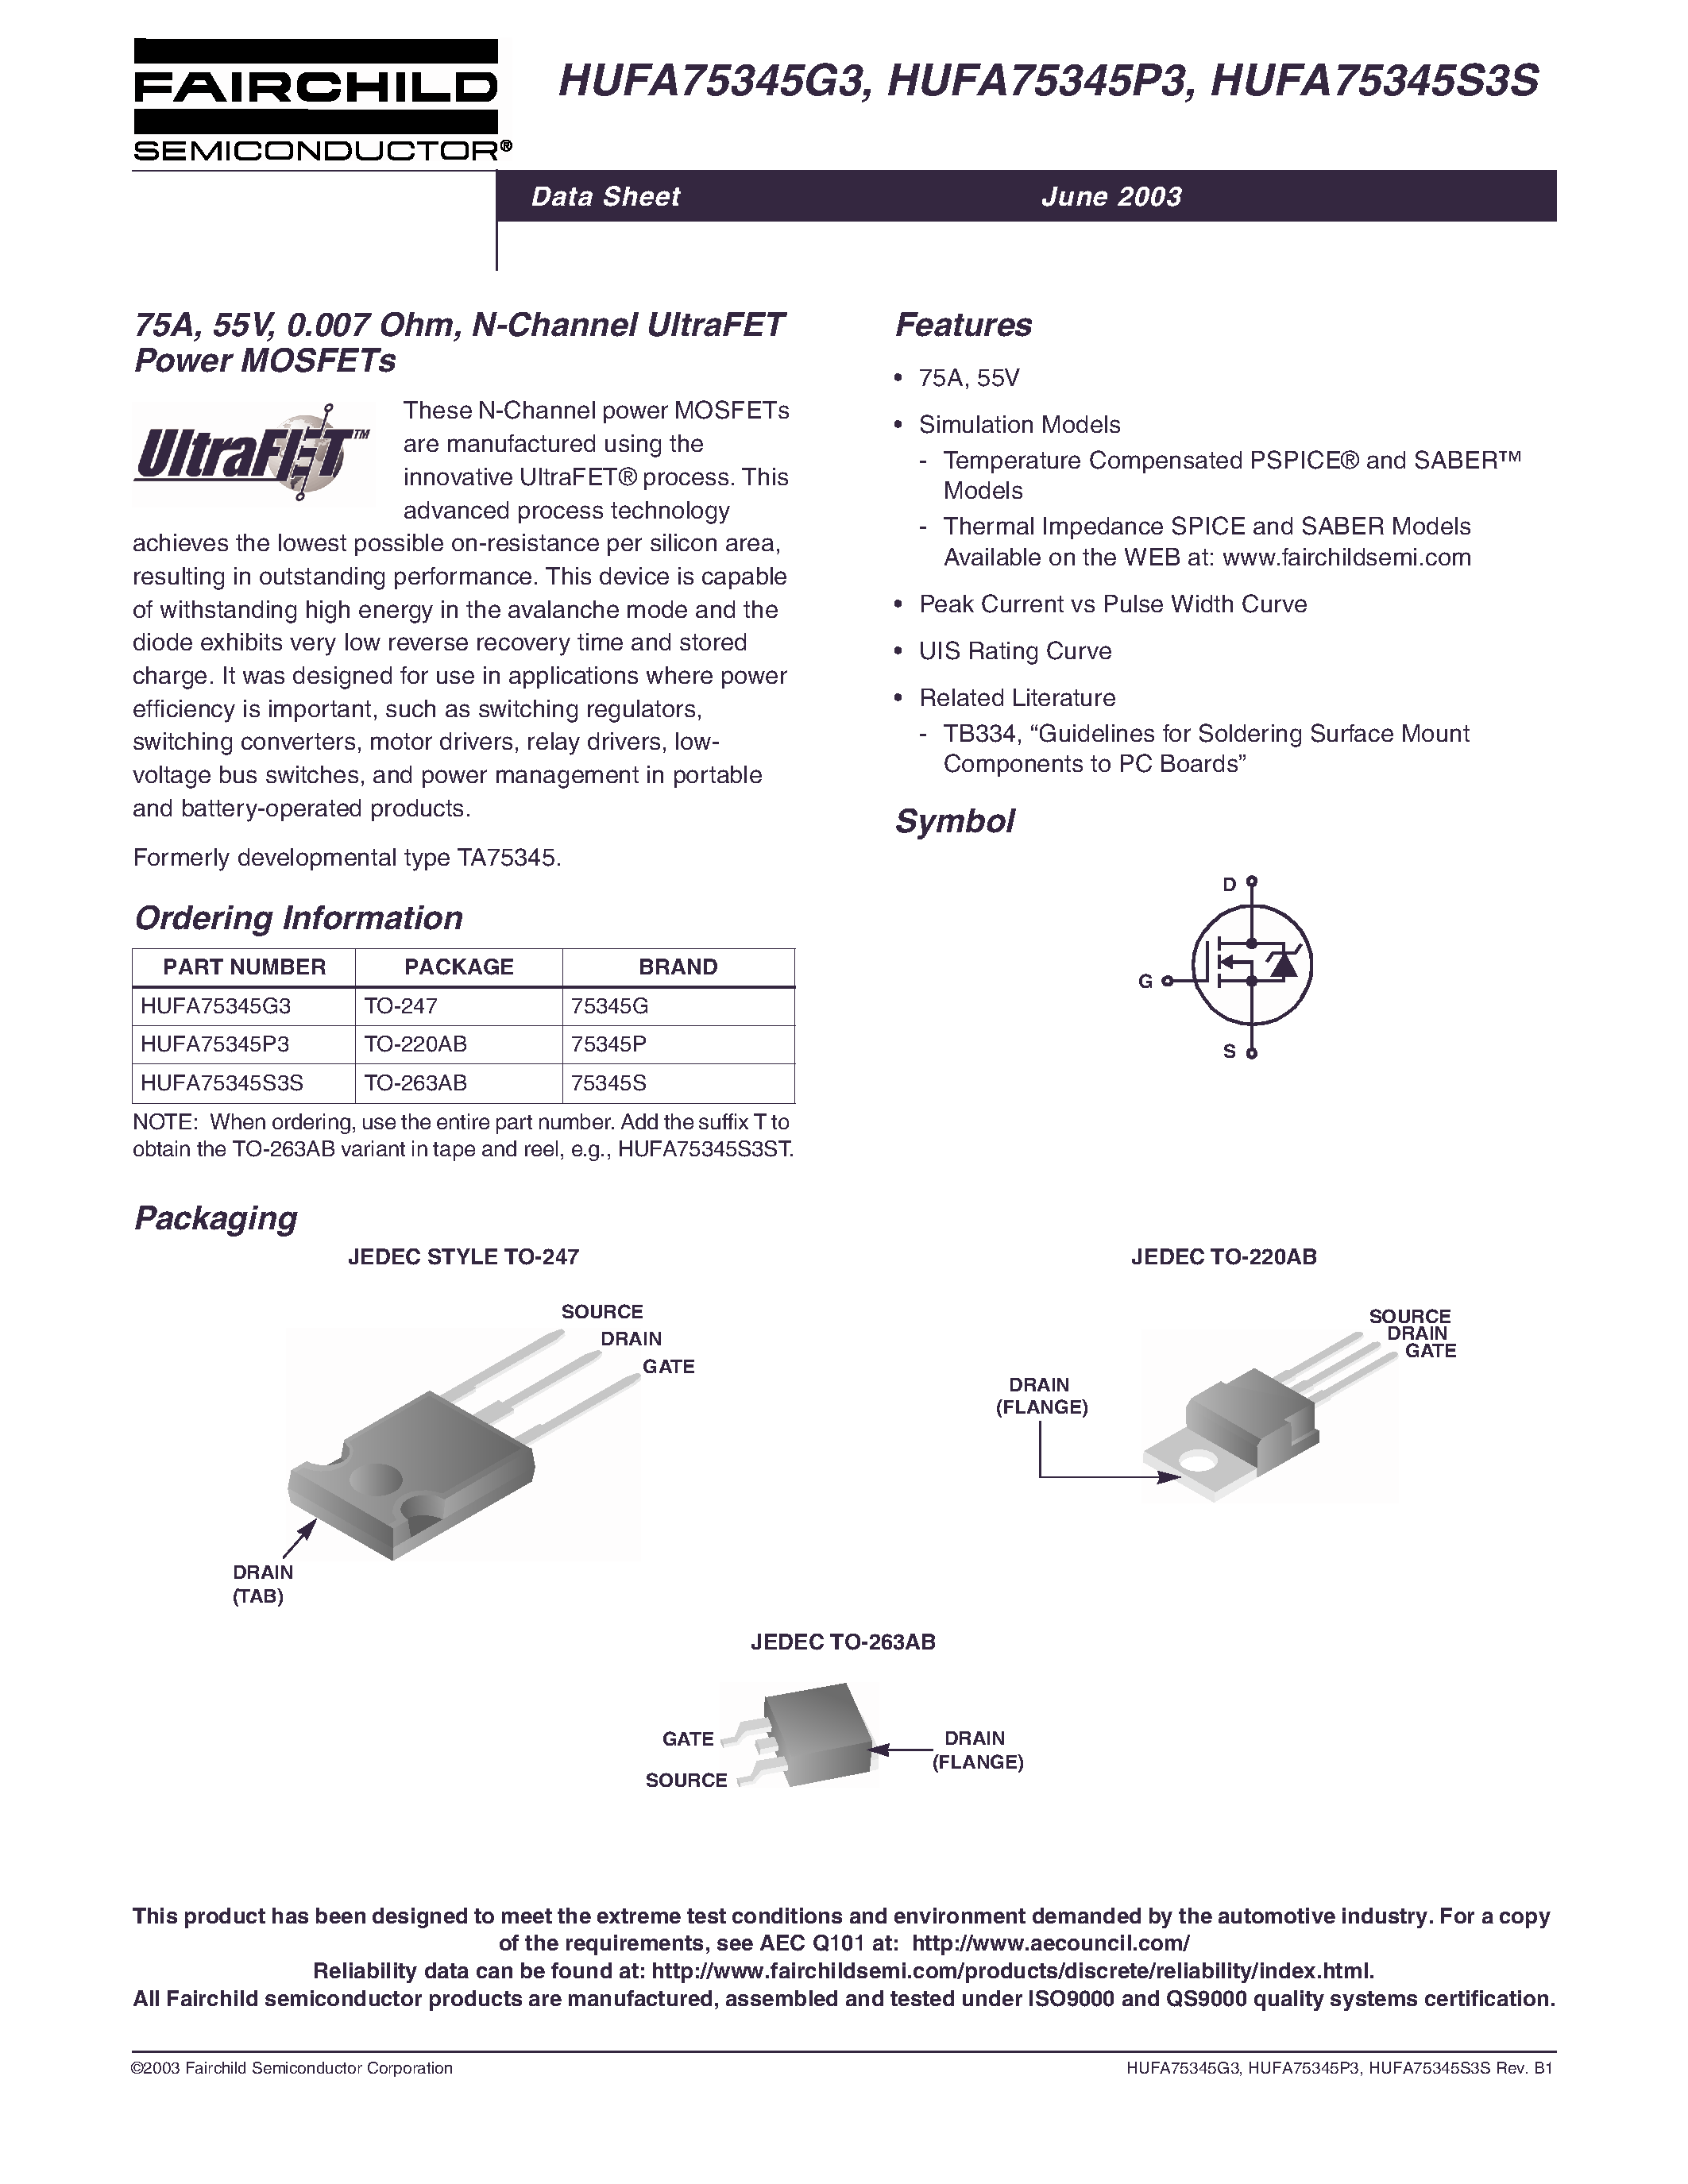 Даташит HUFA75345S3S - 75A/ 55V/ 0.007 Ohm/ N-Channel UltraFET Power MOSFETs страница 1